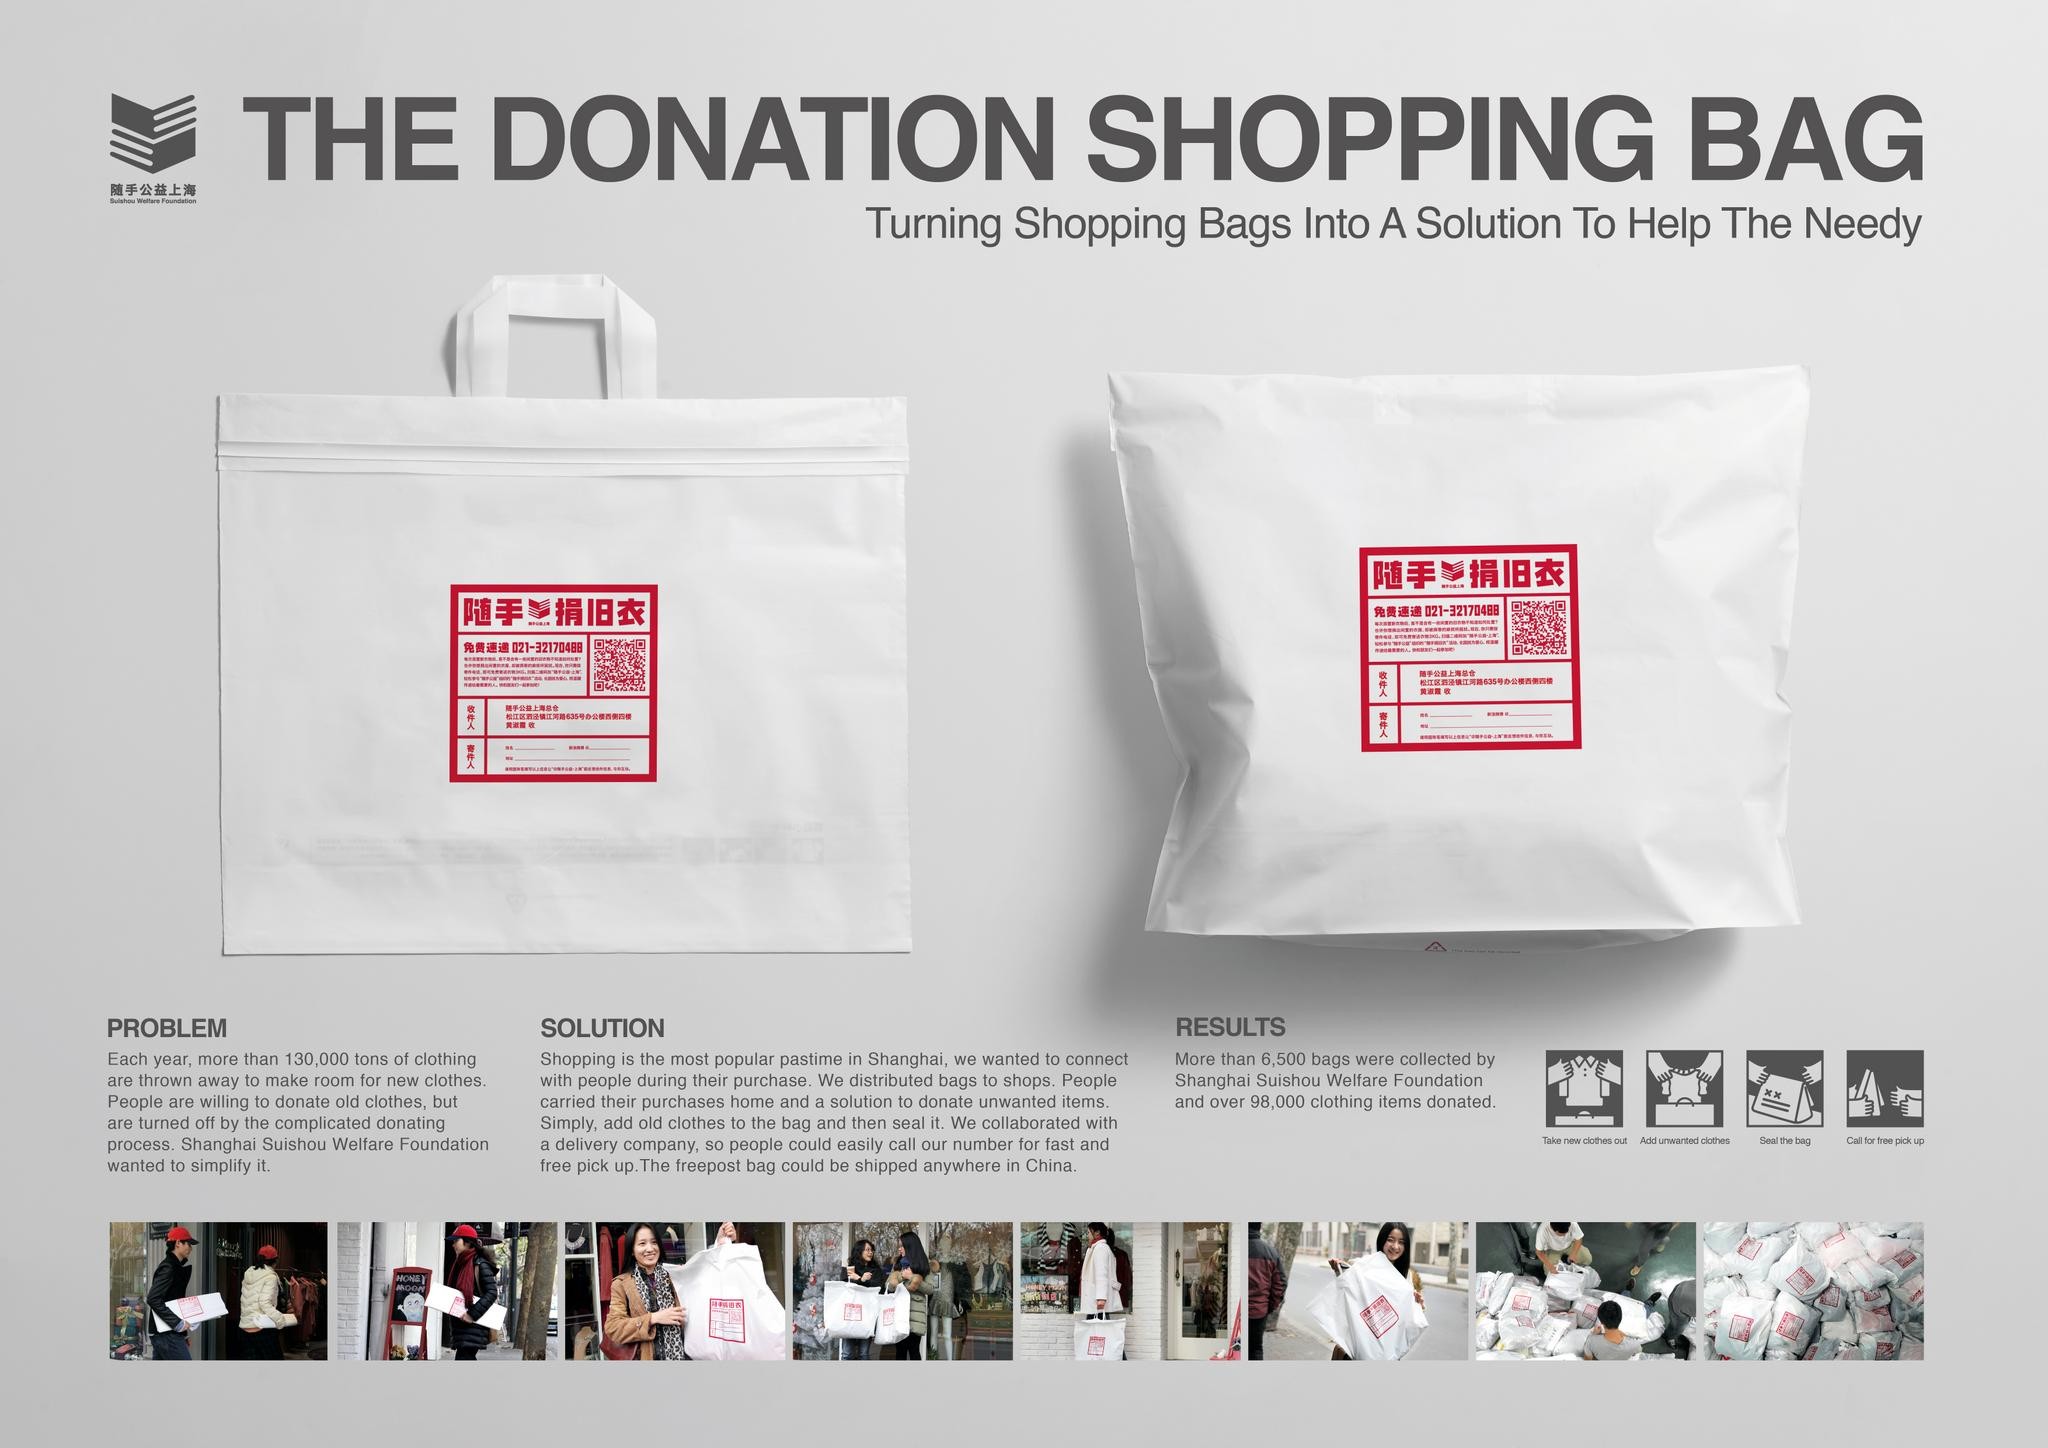 THE DONATION SHOPPING BAG